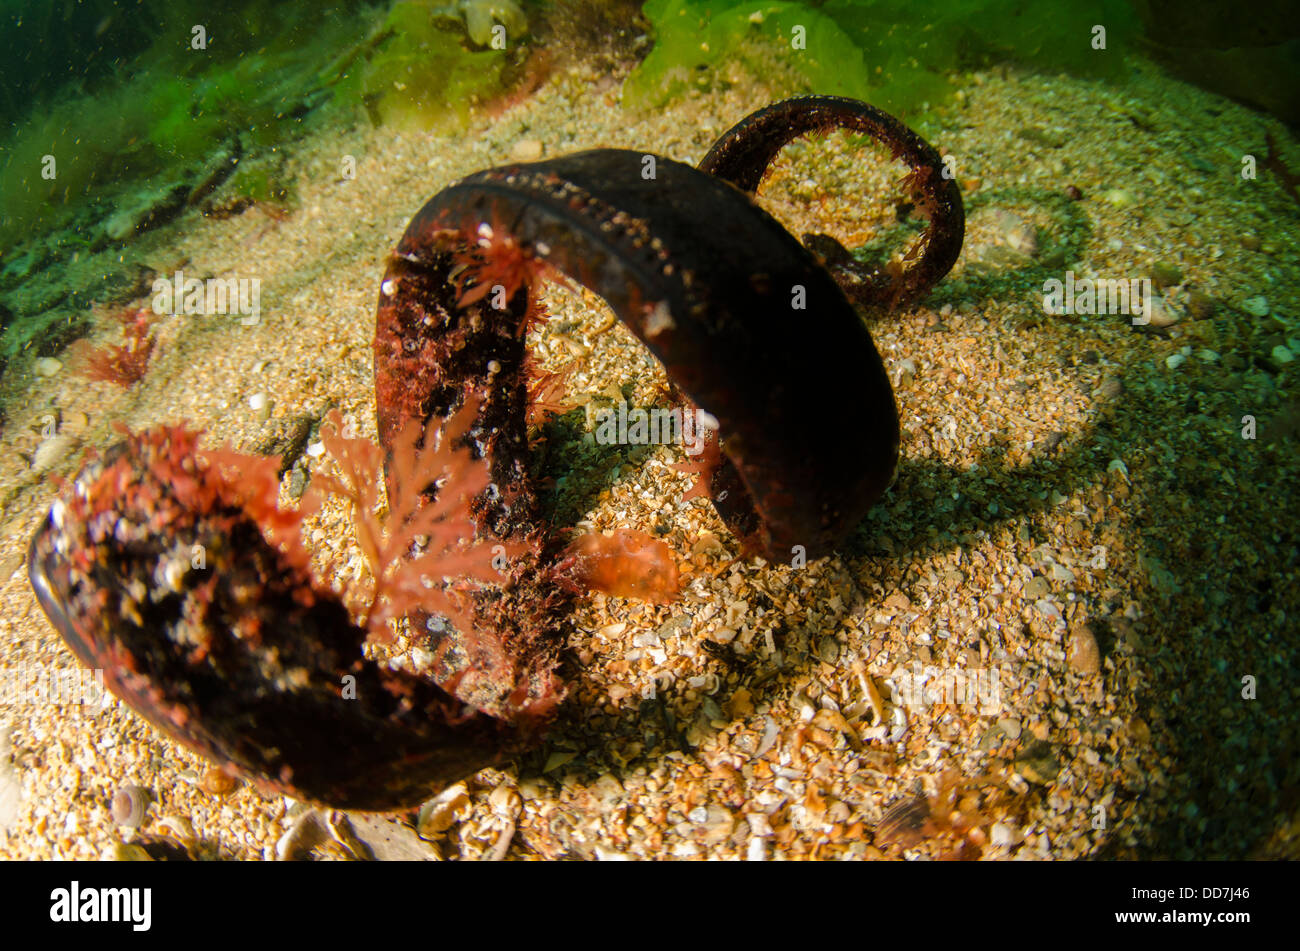 piece of curled rubber, underwater, encrusted with seaweed, colonizing life, rubbish, pollution, Stock Photo